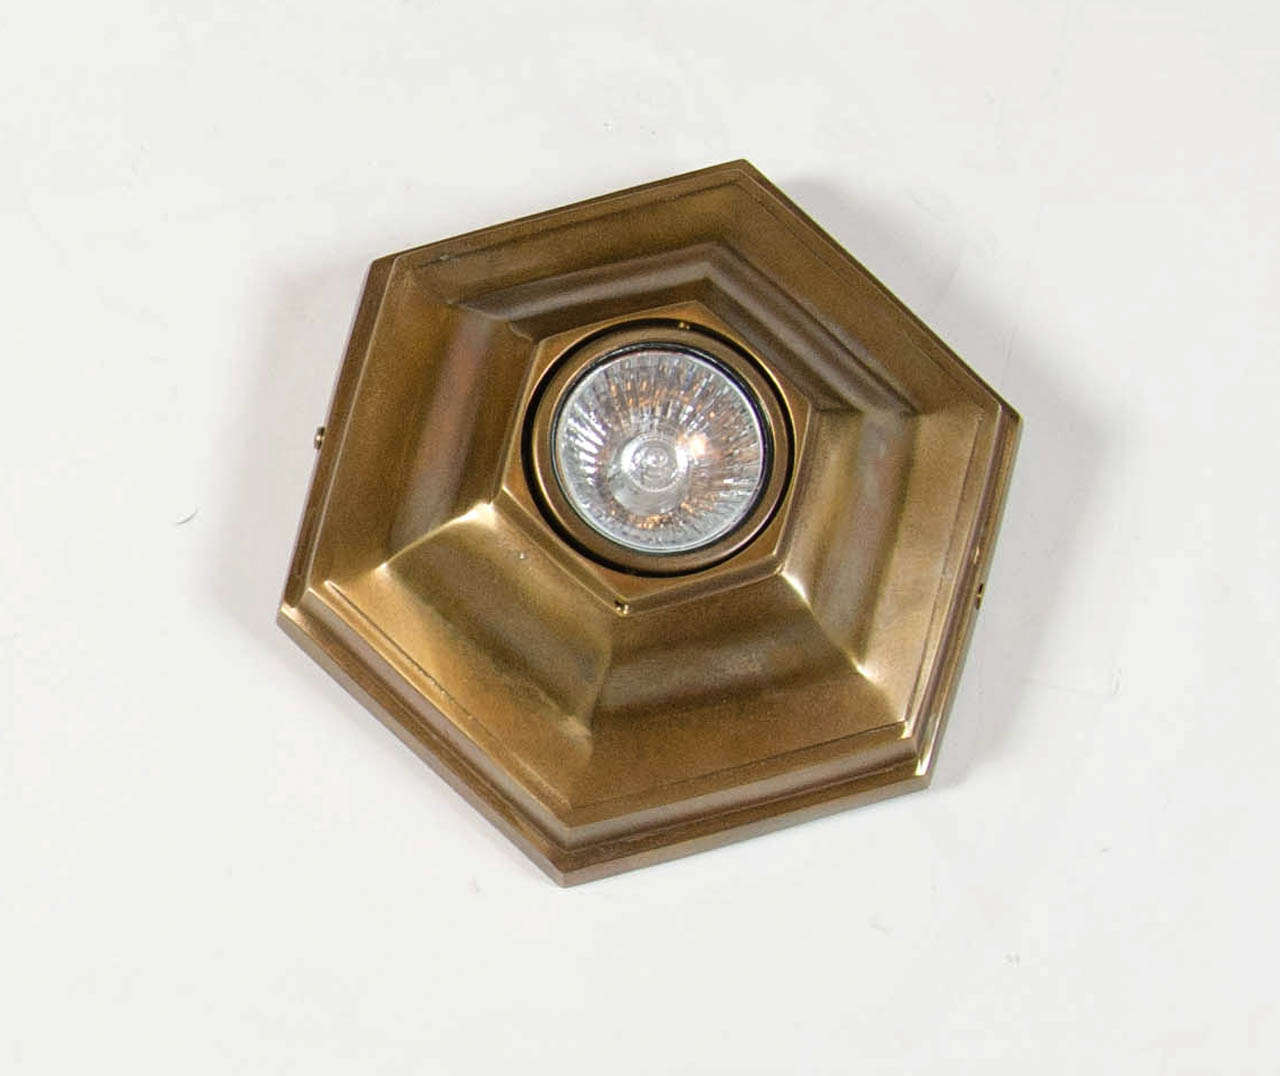 This octagonal Art Deco style spotlight is made of patinated bronze it also has a shadow box design as well,
France, 20th century.
Measures: Width 6
depth 6
height 5.9.